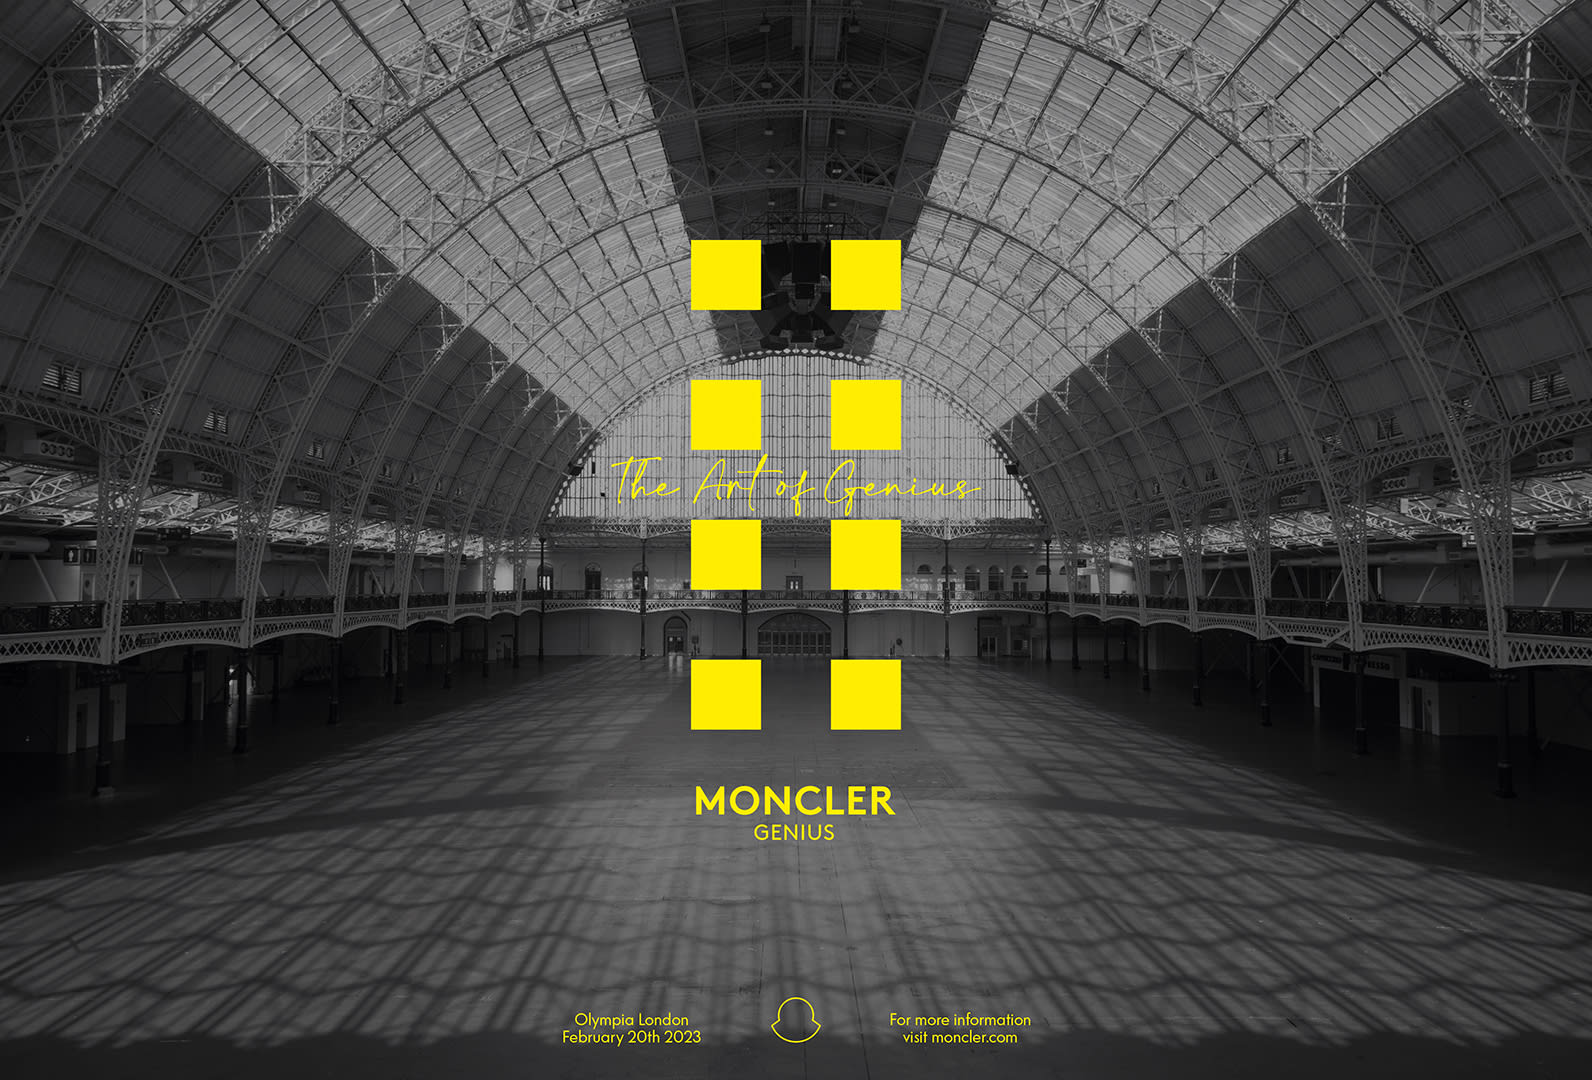 Moncler logo flyer is pictured